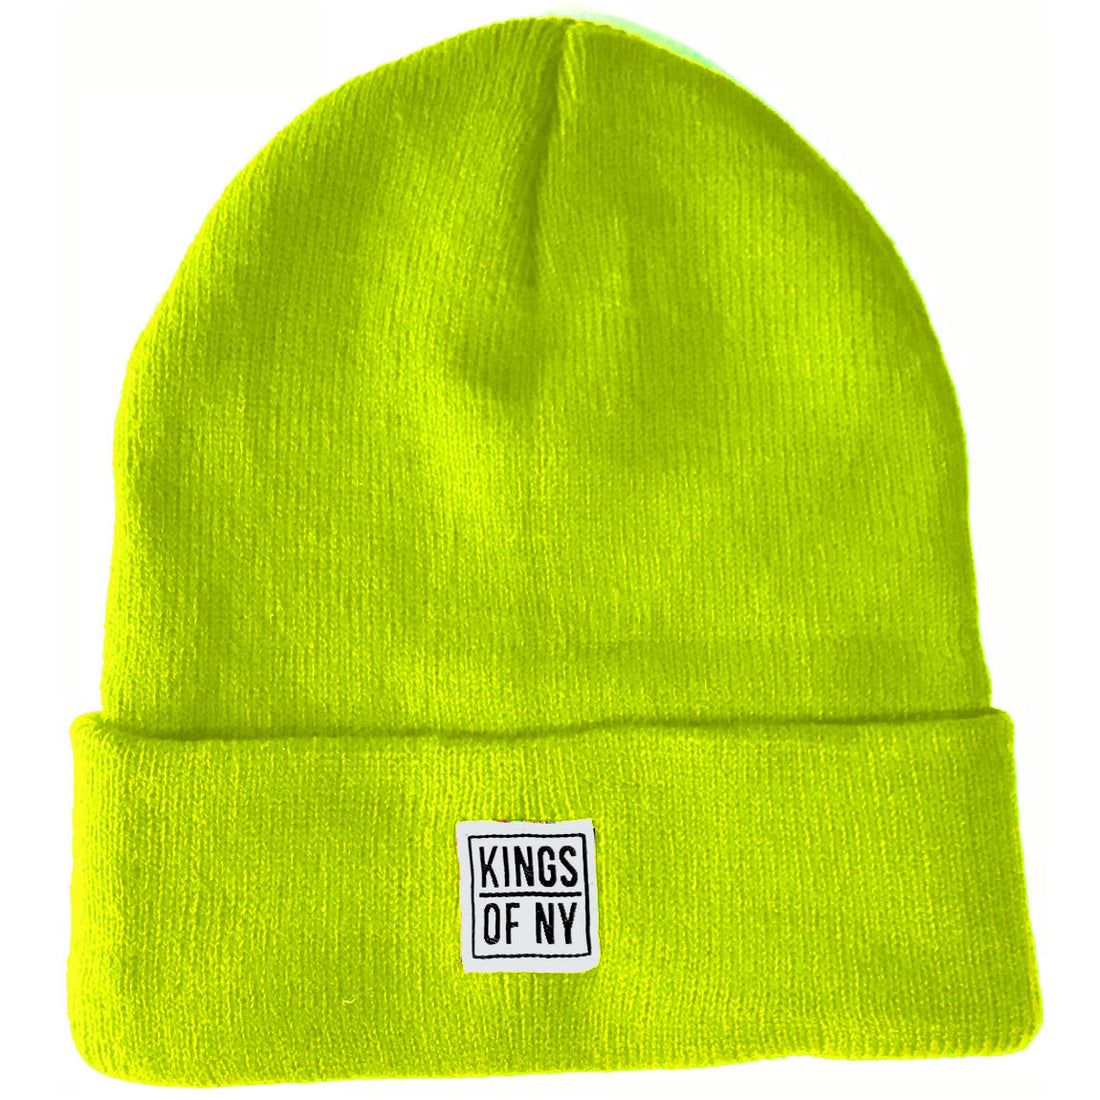 Neon Green Beanie Hat by Kings Of NY